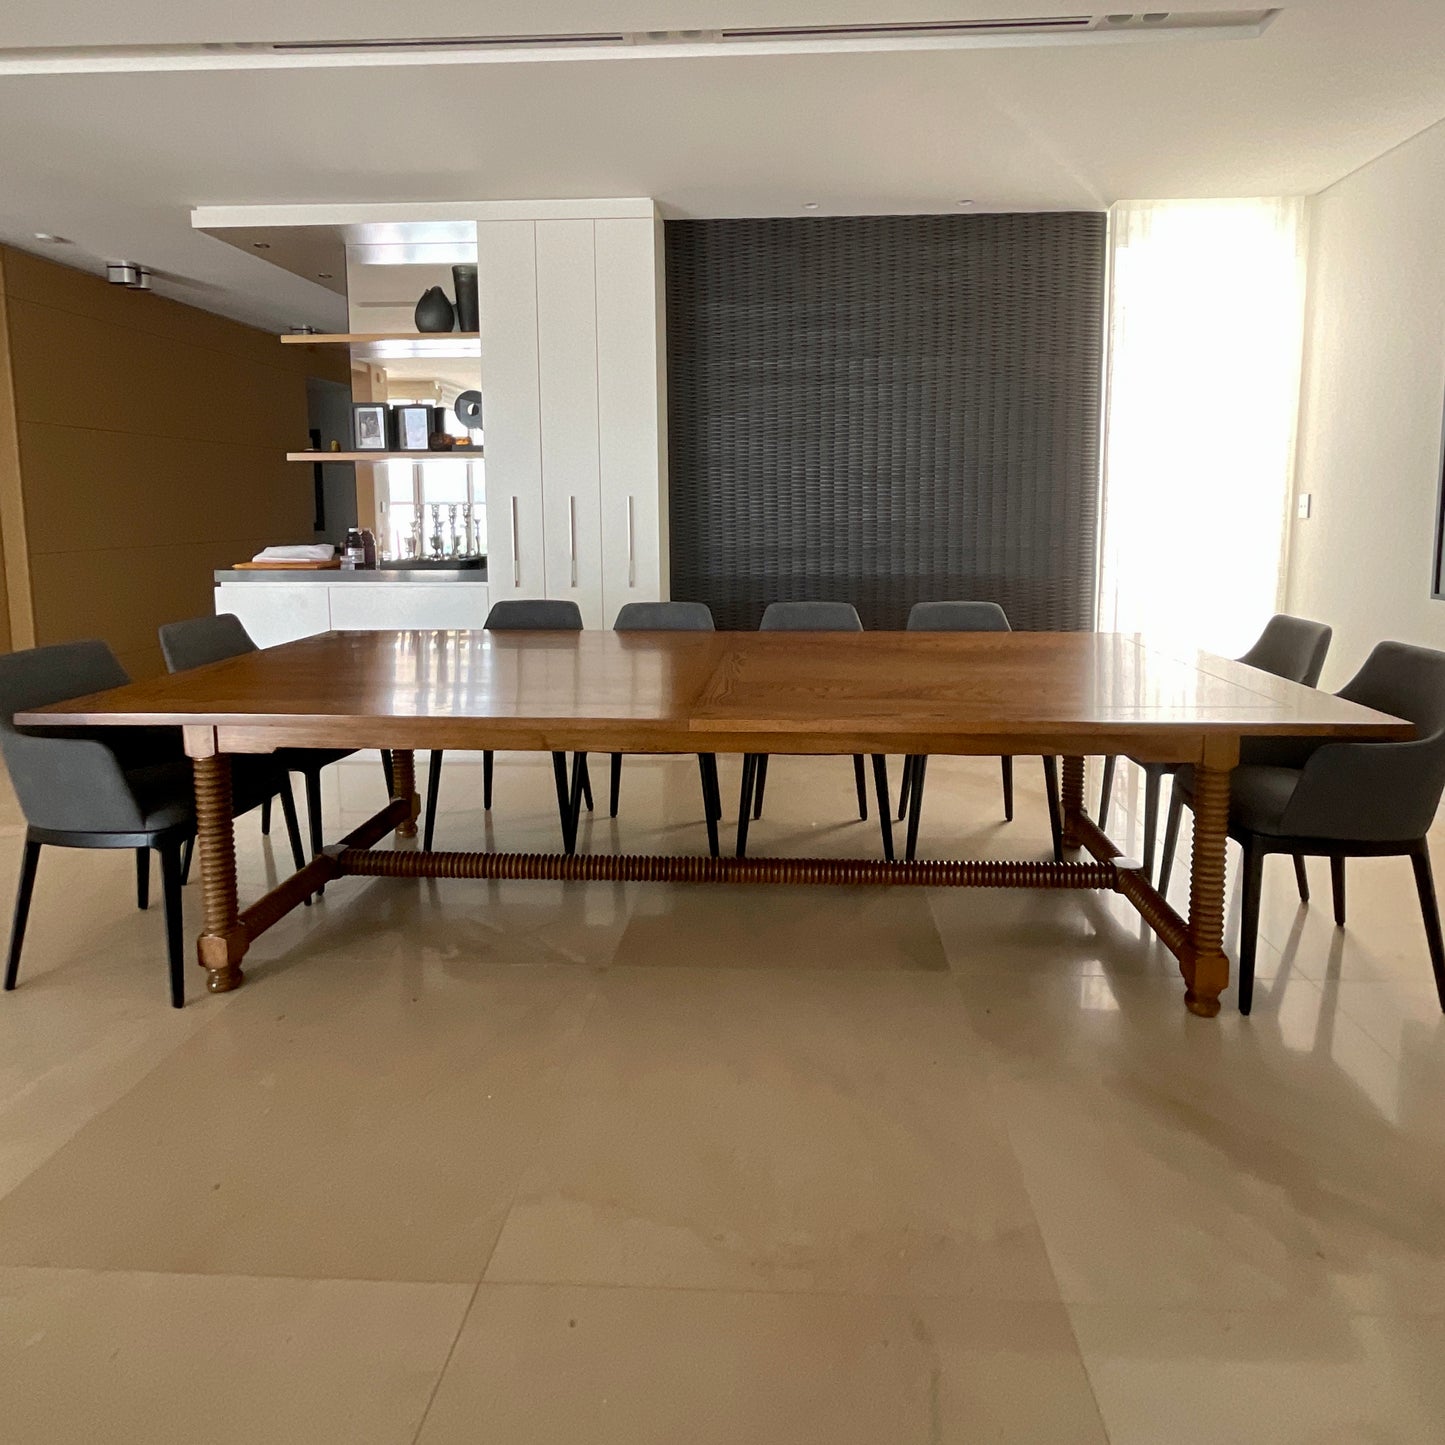 Load image into Gallery viewer, Bespoke Extension Dining Table by Original Finish
